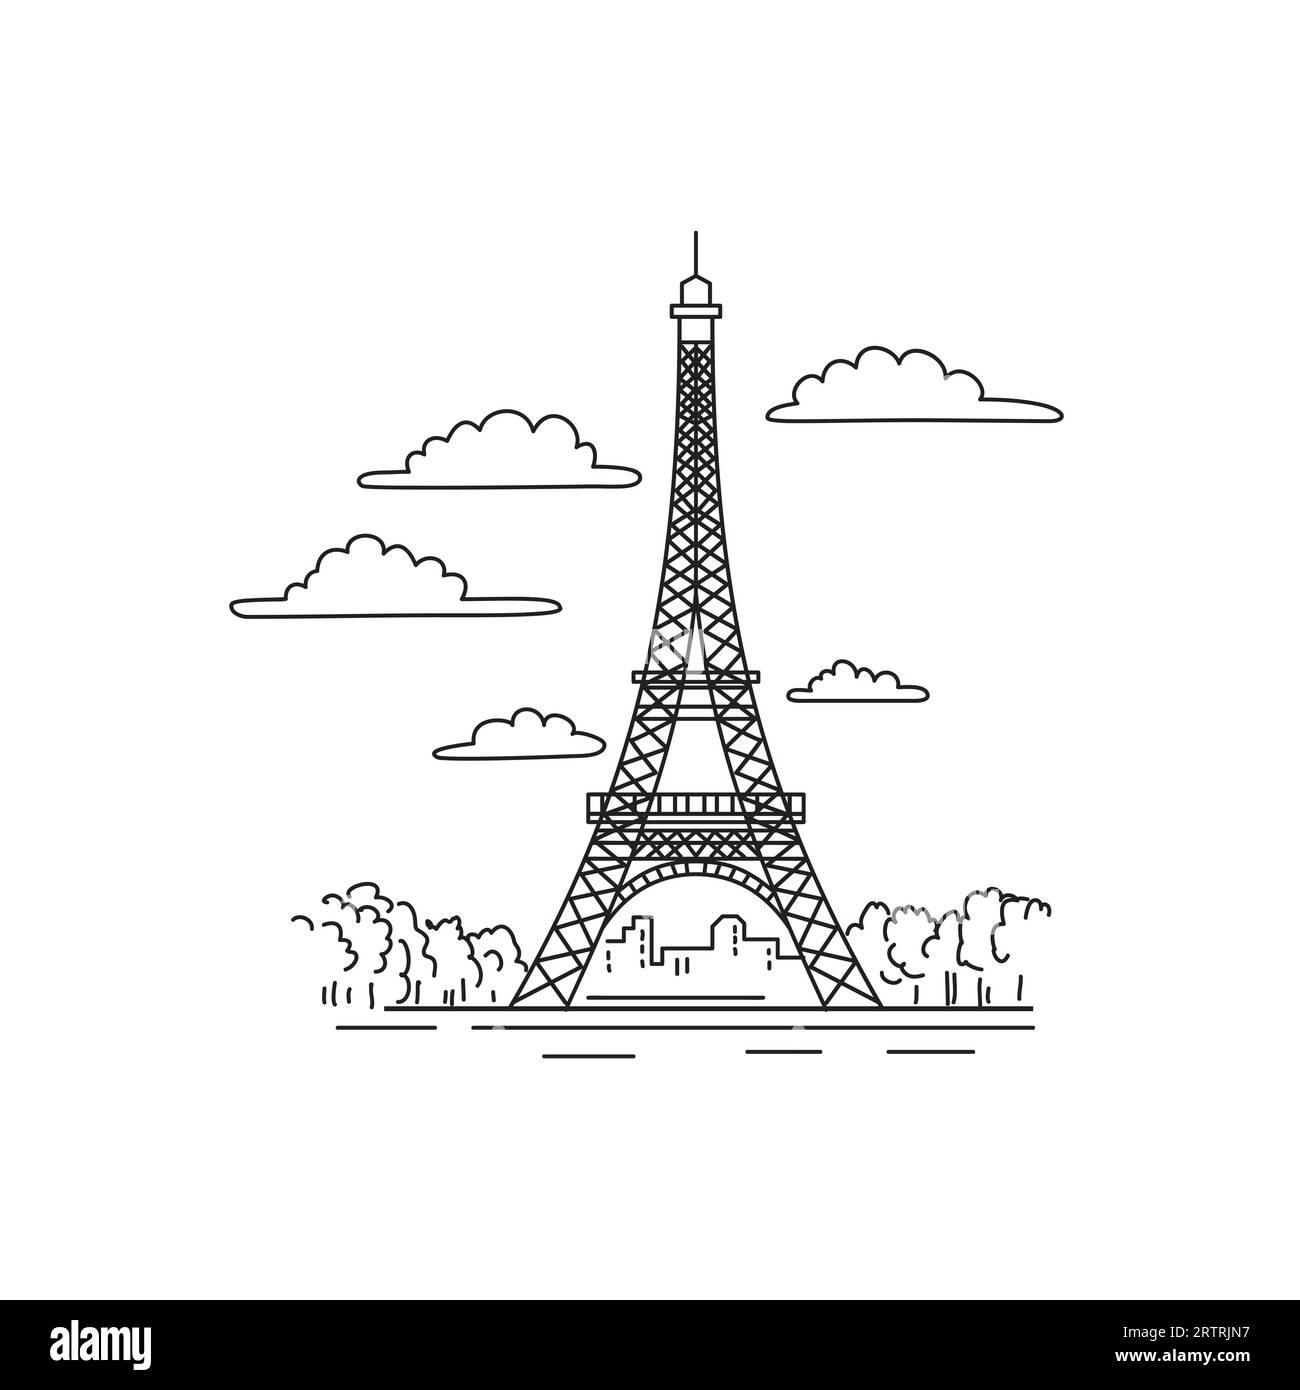 Mono line illustration of Eiffel Tower or Tour Eiffel on the Champ de Mars in Paris, France done in monoline line art black and white style. Stock Photo